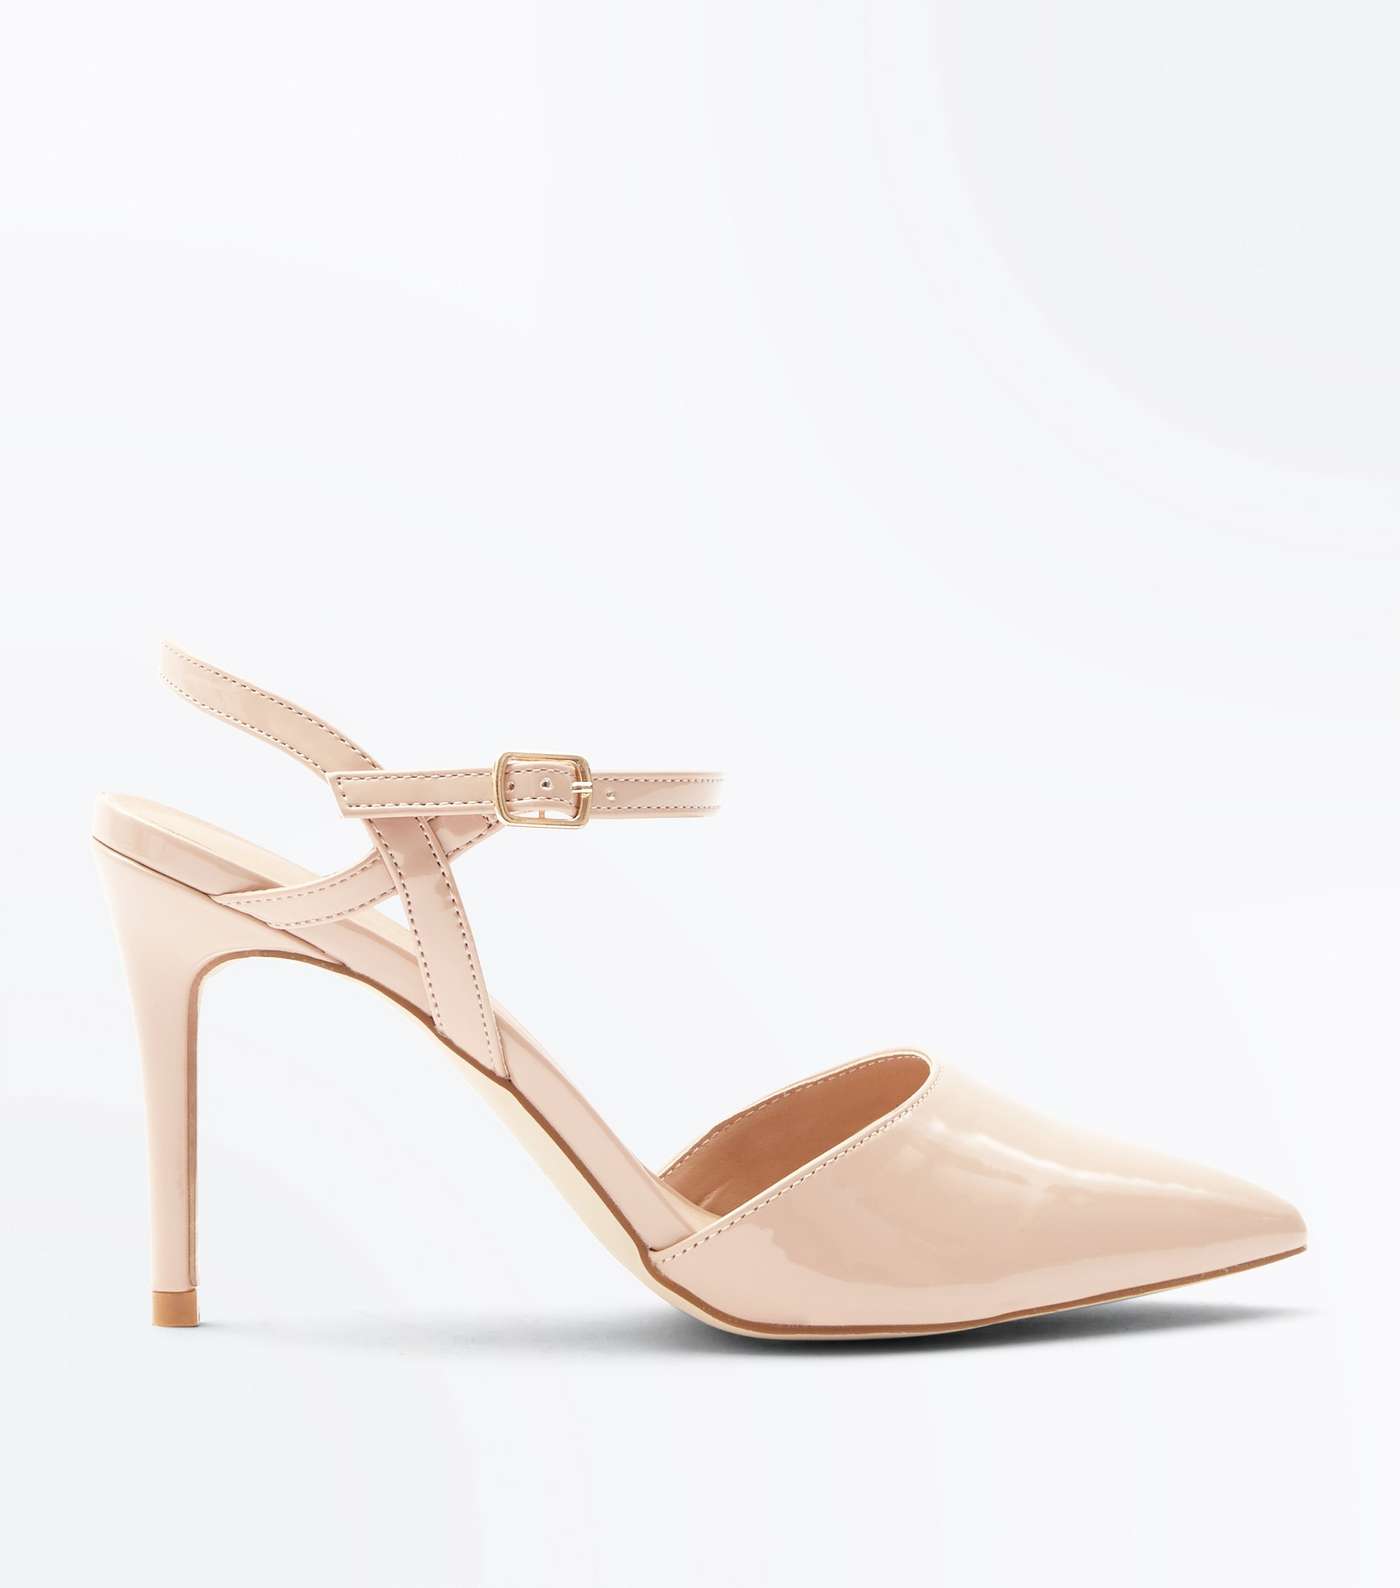 Nude Patent Ankle Strap Court Shoes